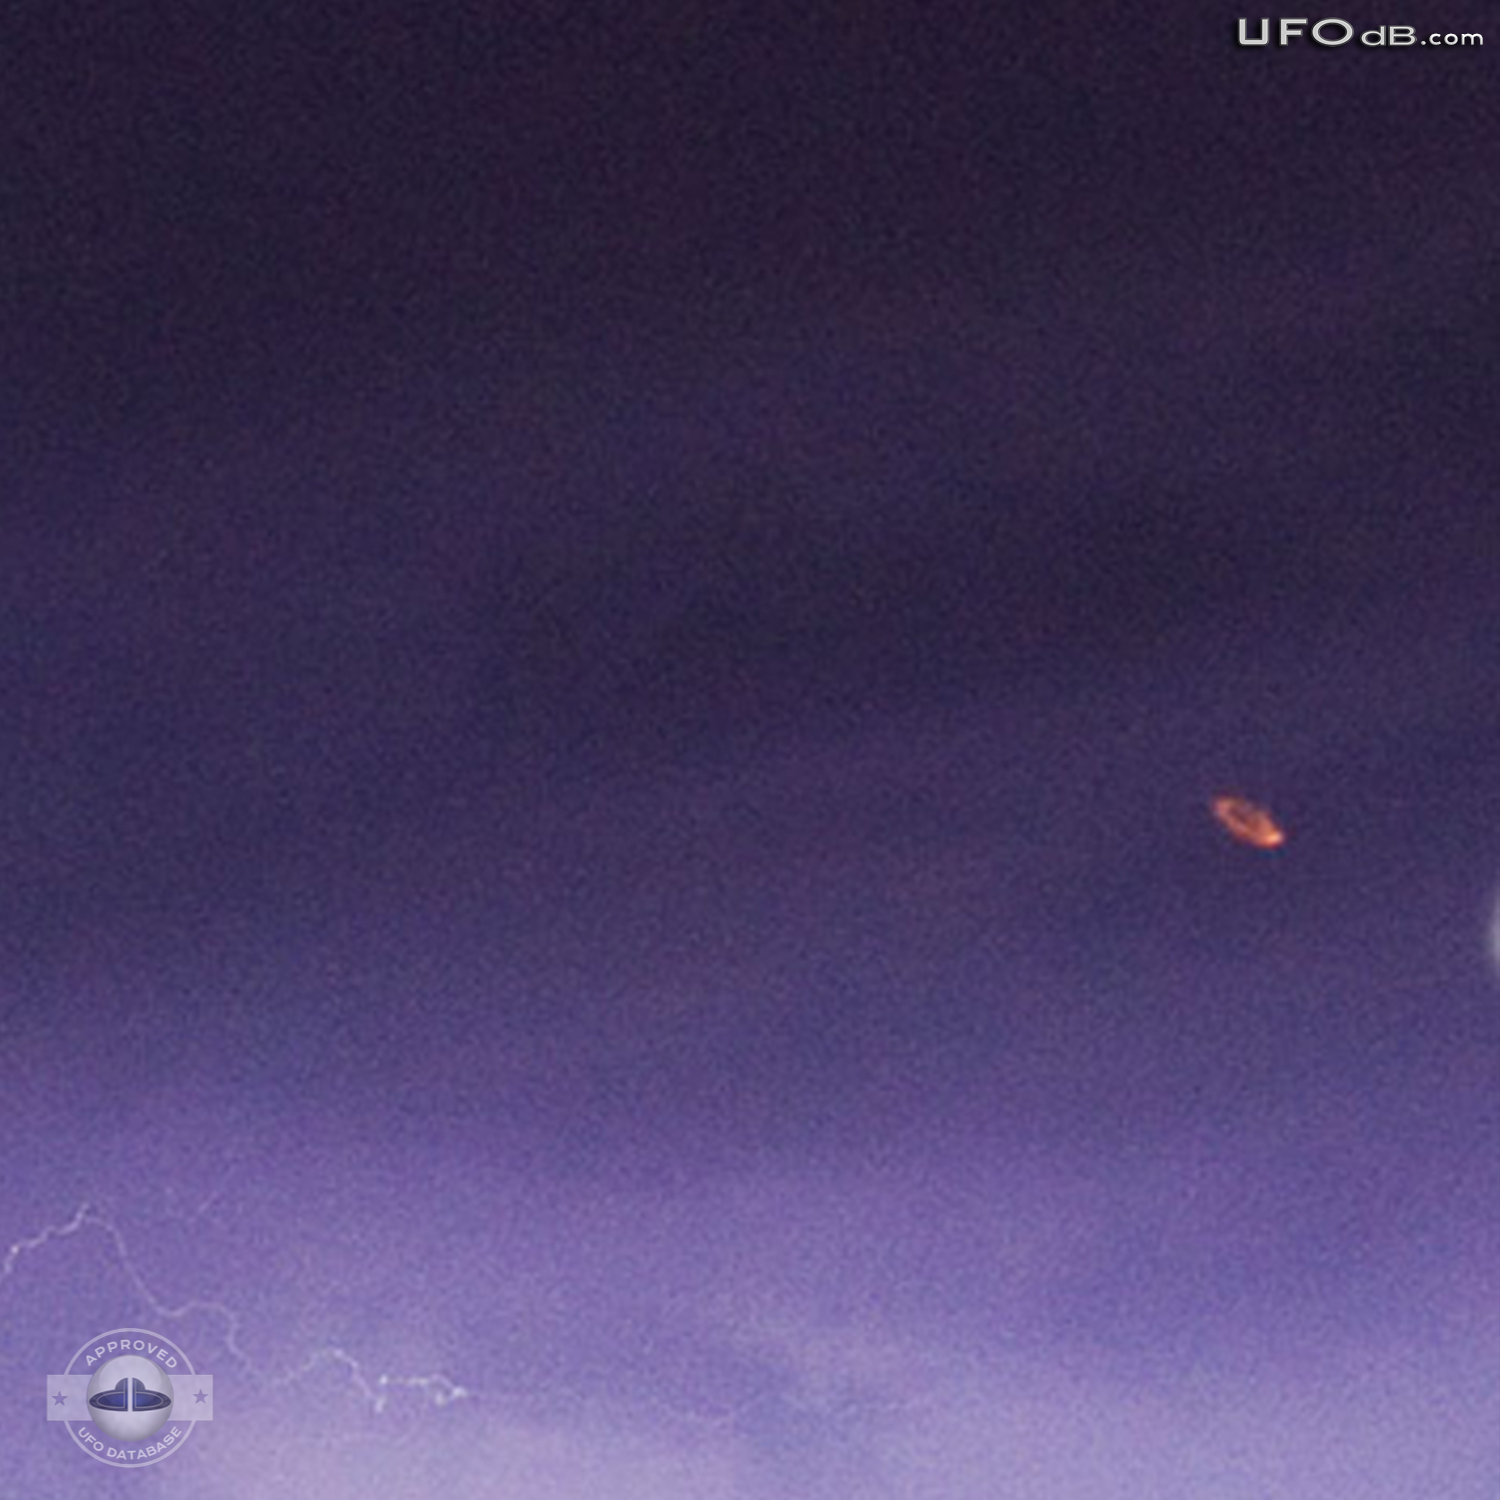 Professional photographer capture UFO near lightnings in Portugal 2010 UFO Picture #345-3